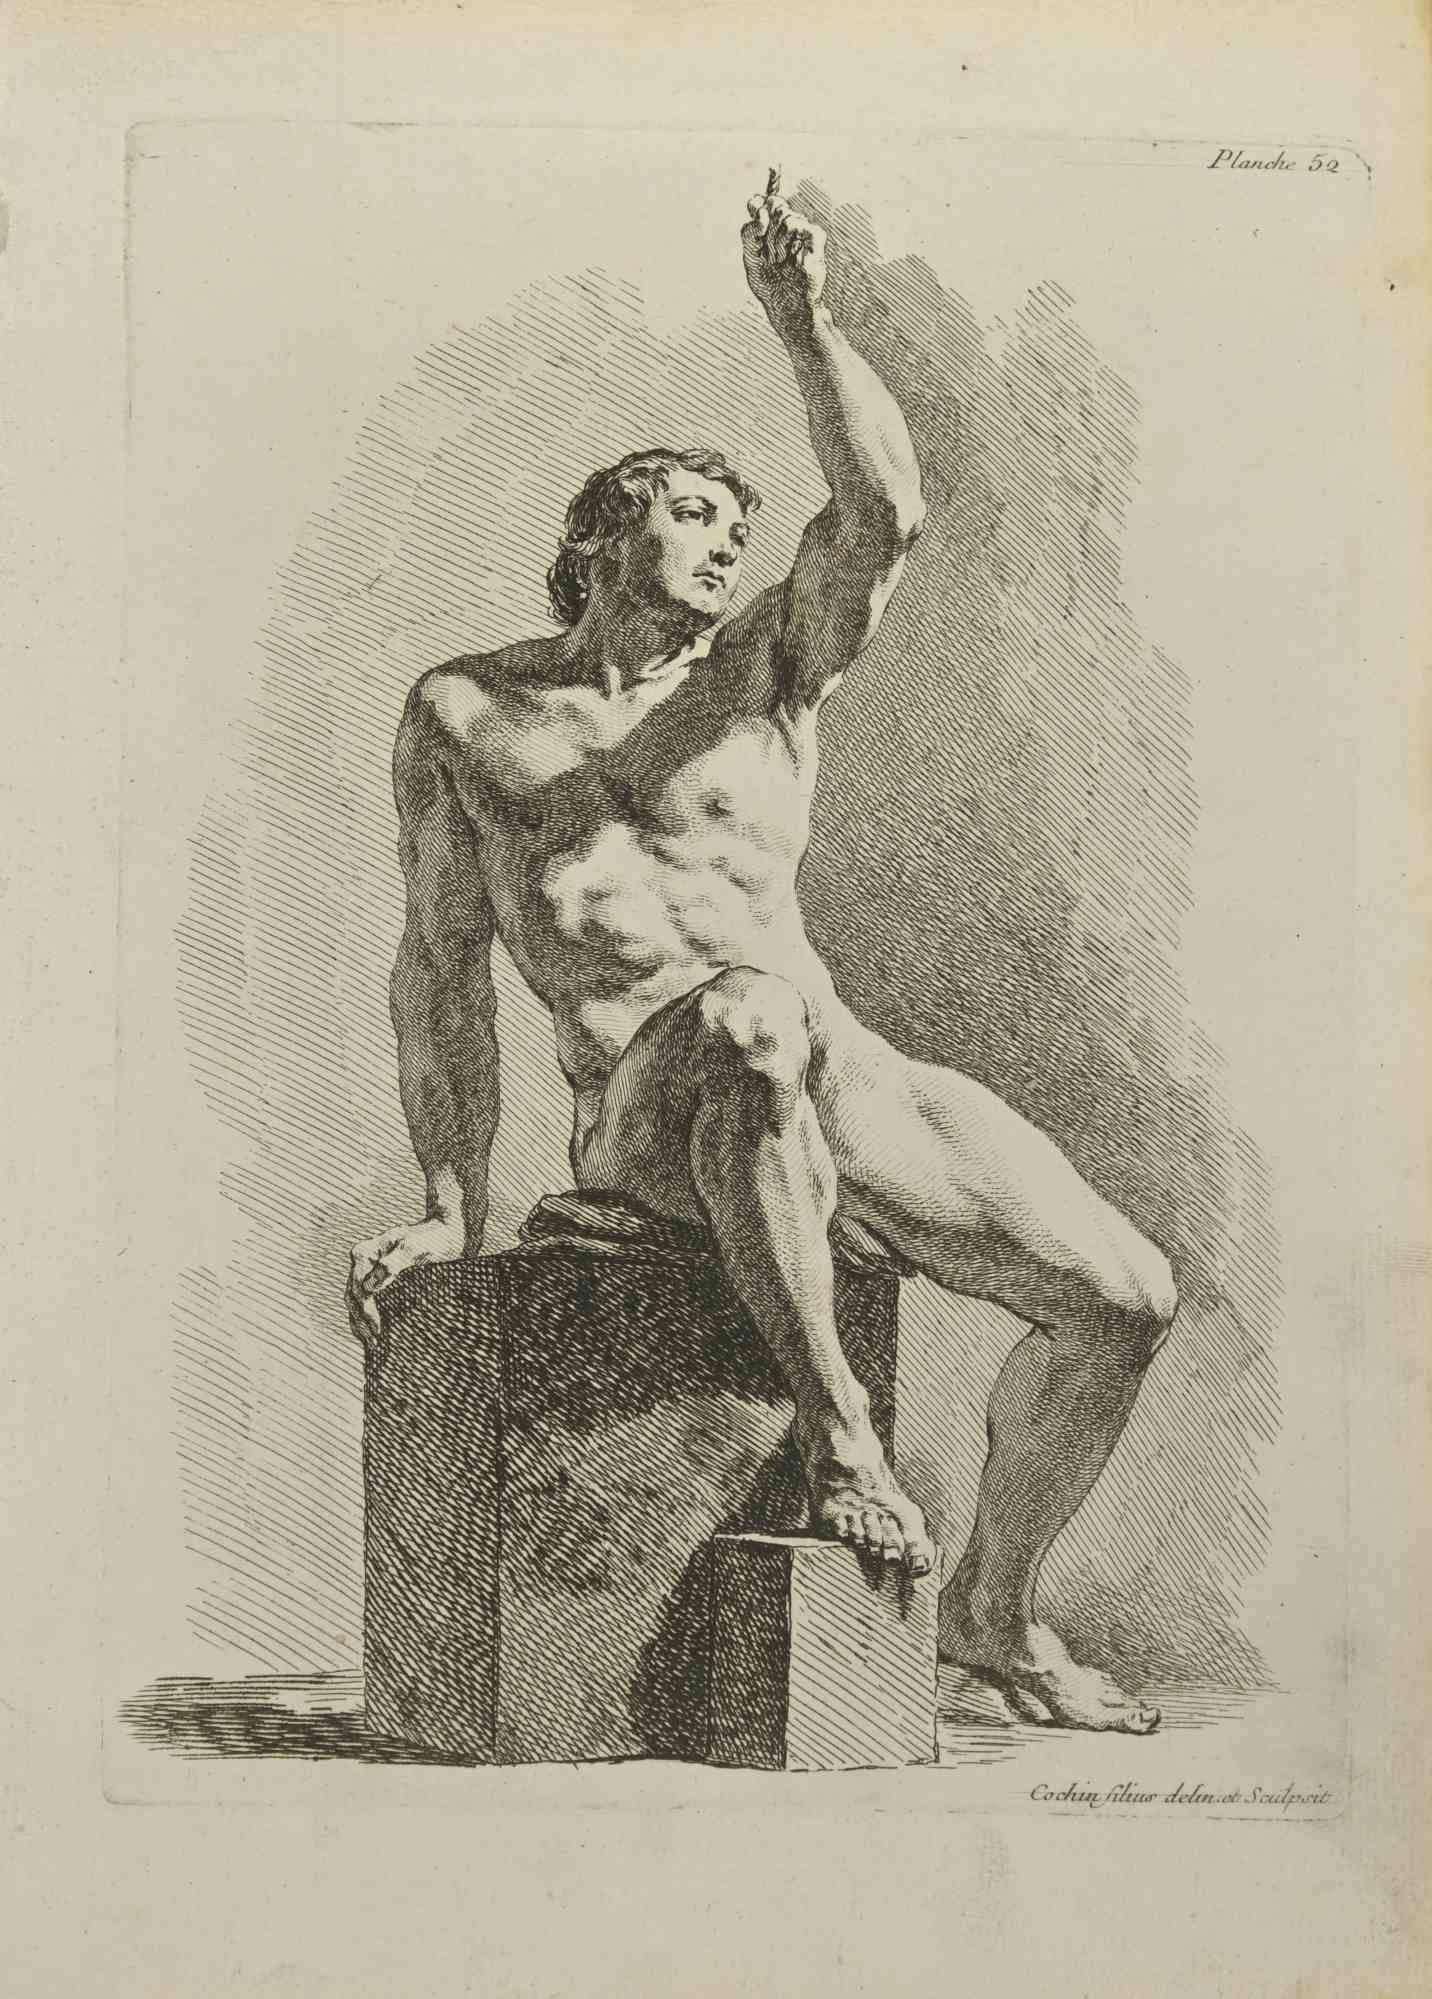 Anatomy Studies is an etching realized by Nicholas Cochin in 1755.

Good conditions with slight foxing.

Signed in the plate.

The artwork is depicted through confident strokes.

The etching was realized for the anatomy study “JOMBERT,